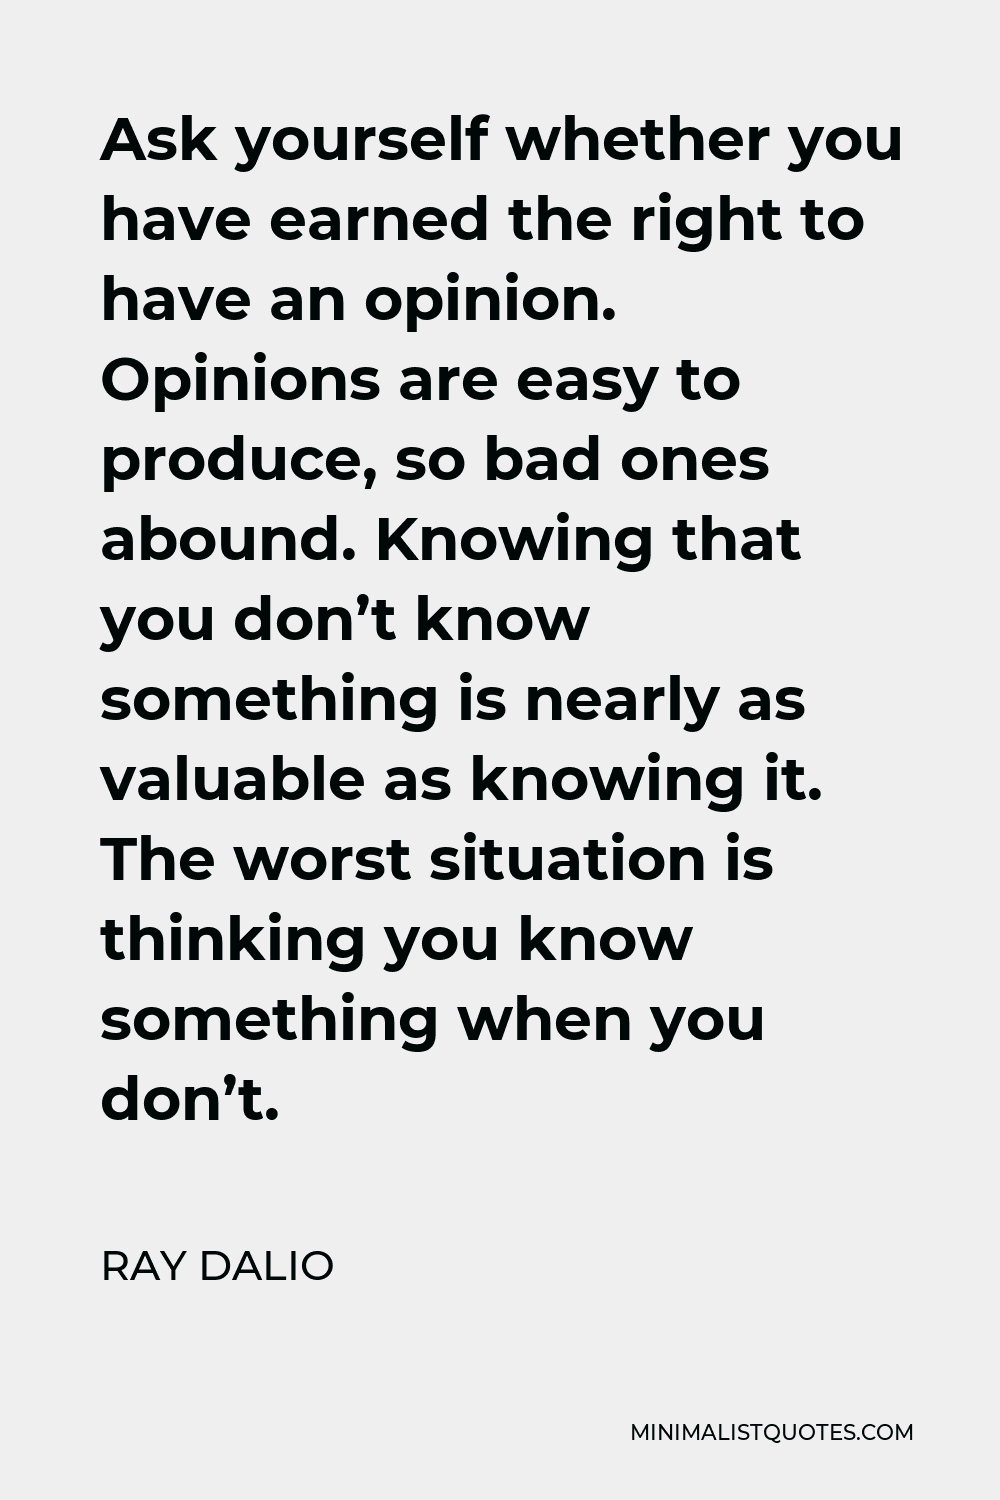 Ray Dalio Quote - Ask yourself whether you have earned the right to have an opinion. Opinions are easy to produce, so bad ones abound. Knowing that you don’t know something is nearly as valuable as knowing it. The worst situation is thinking you know something when you don’t.